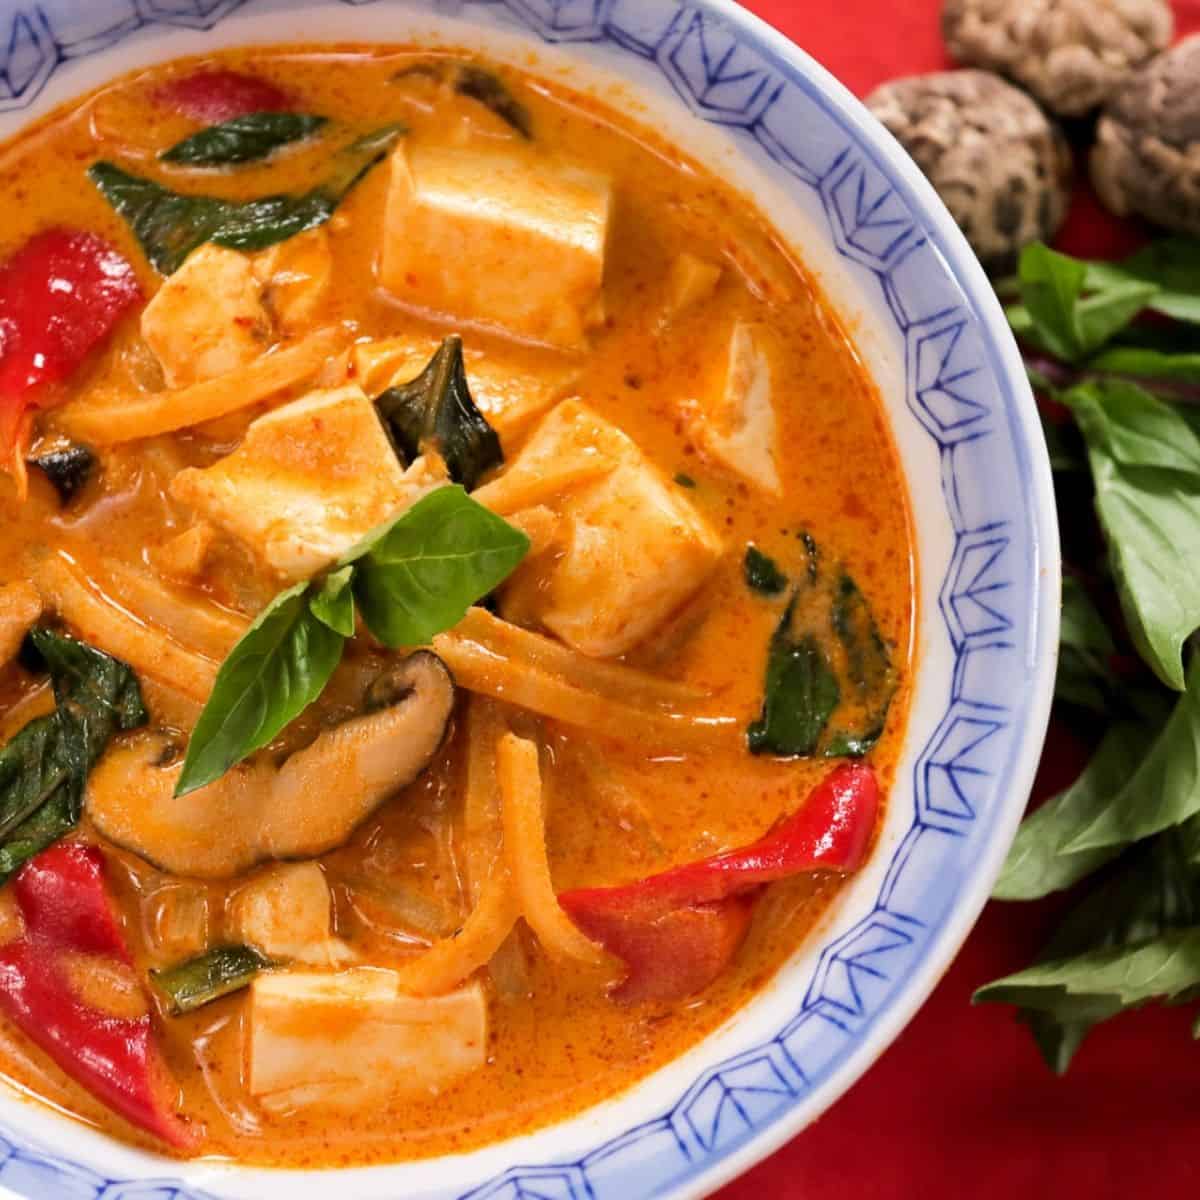 A bowl of Thai red curry with mushrooms, tofu, and Thai basil